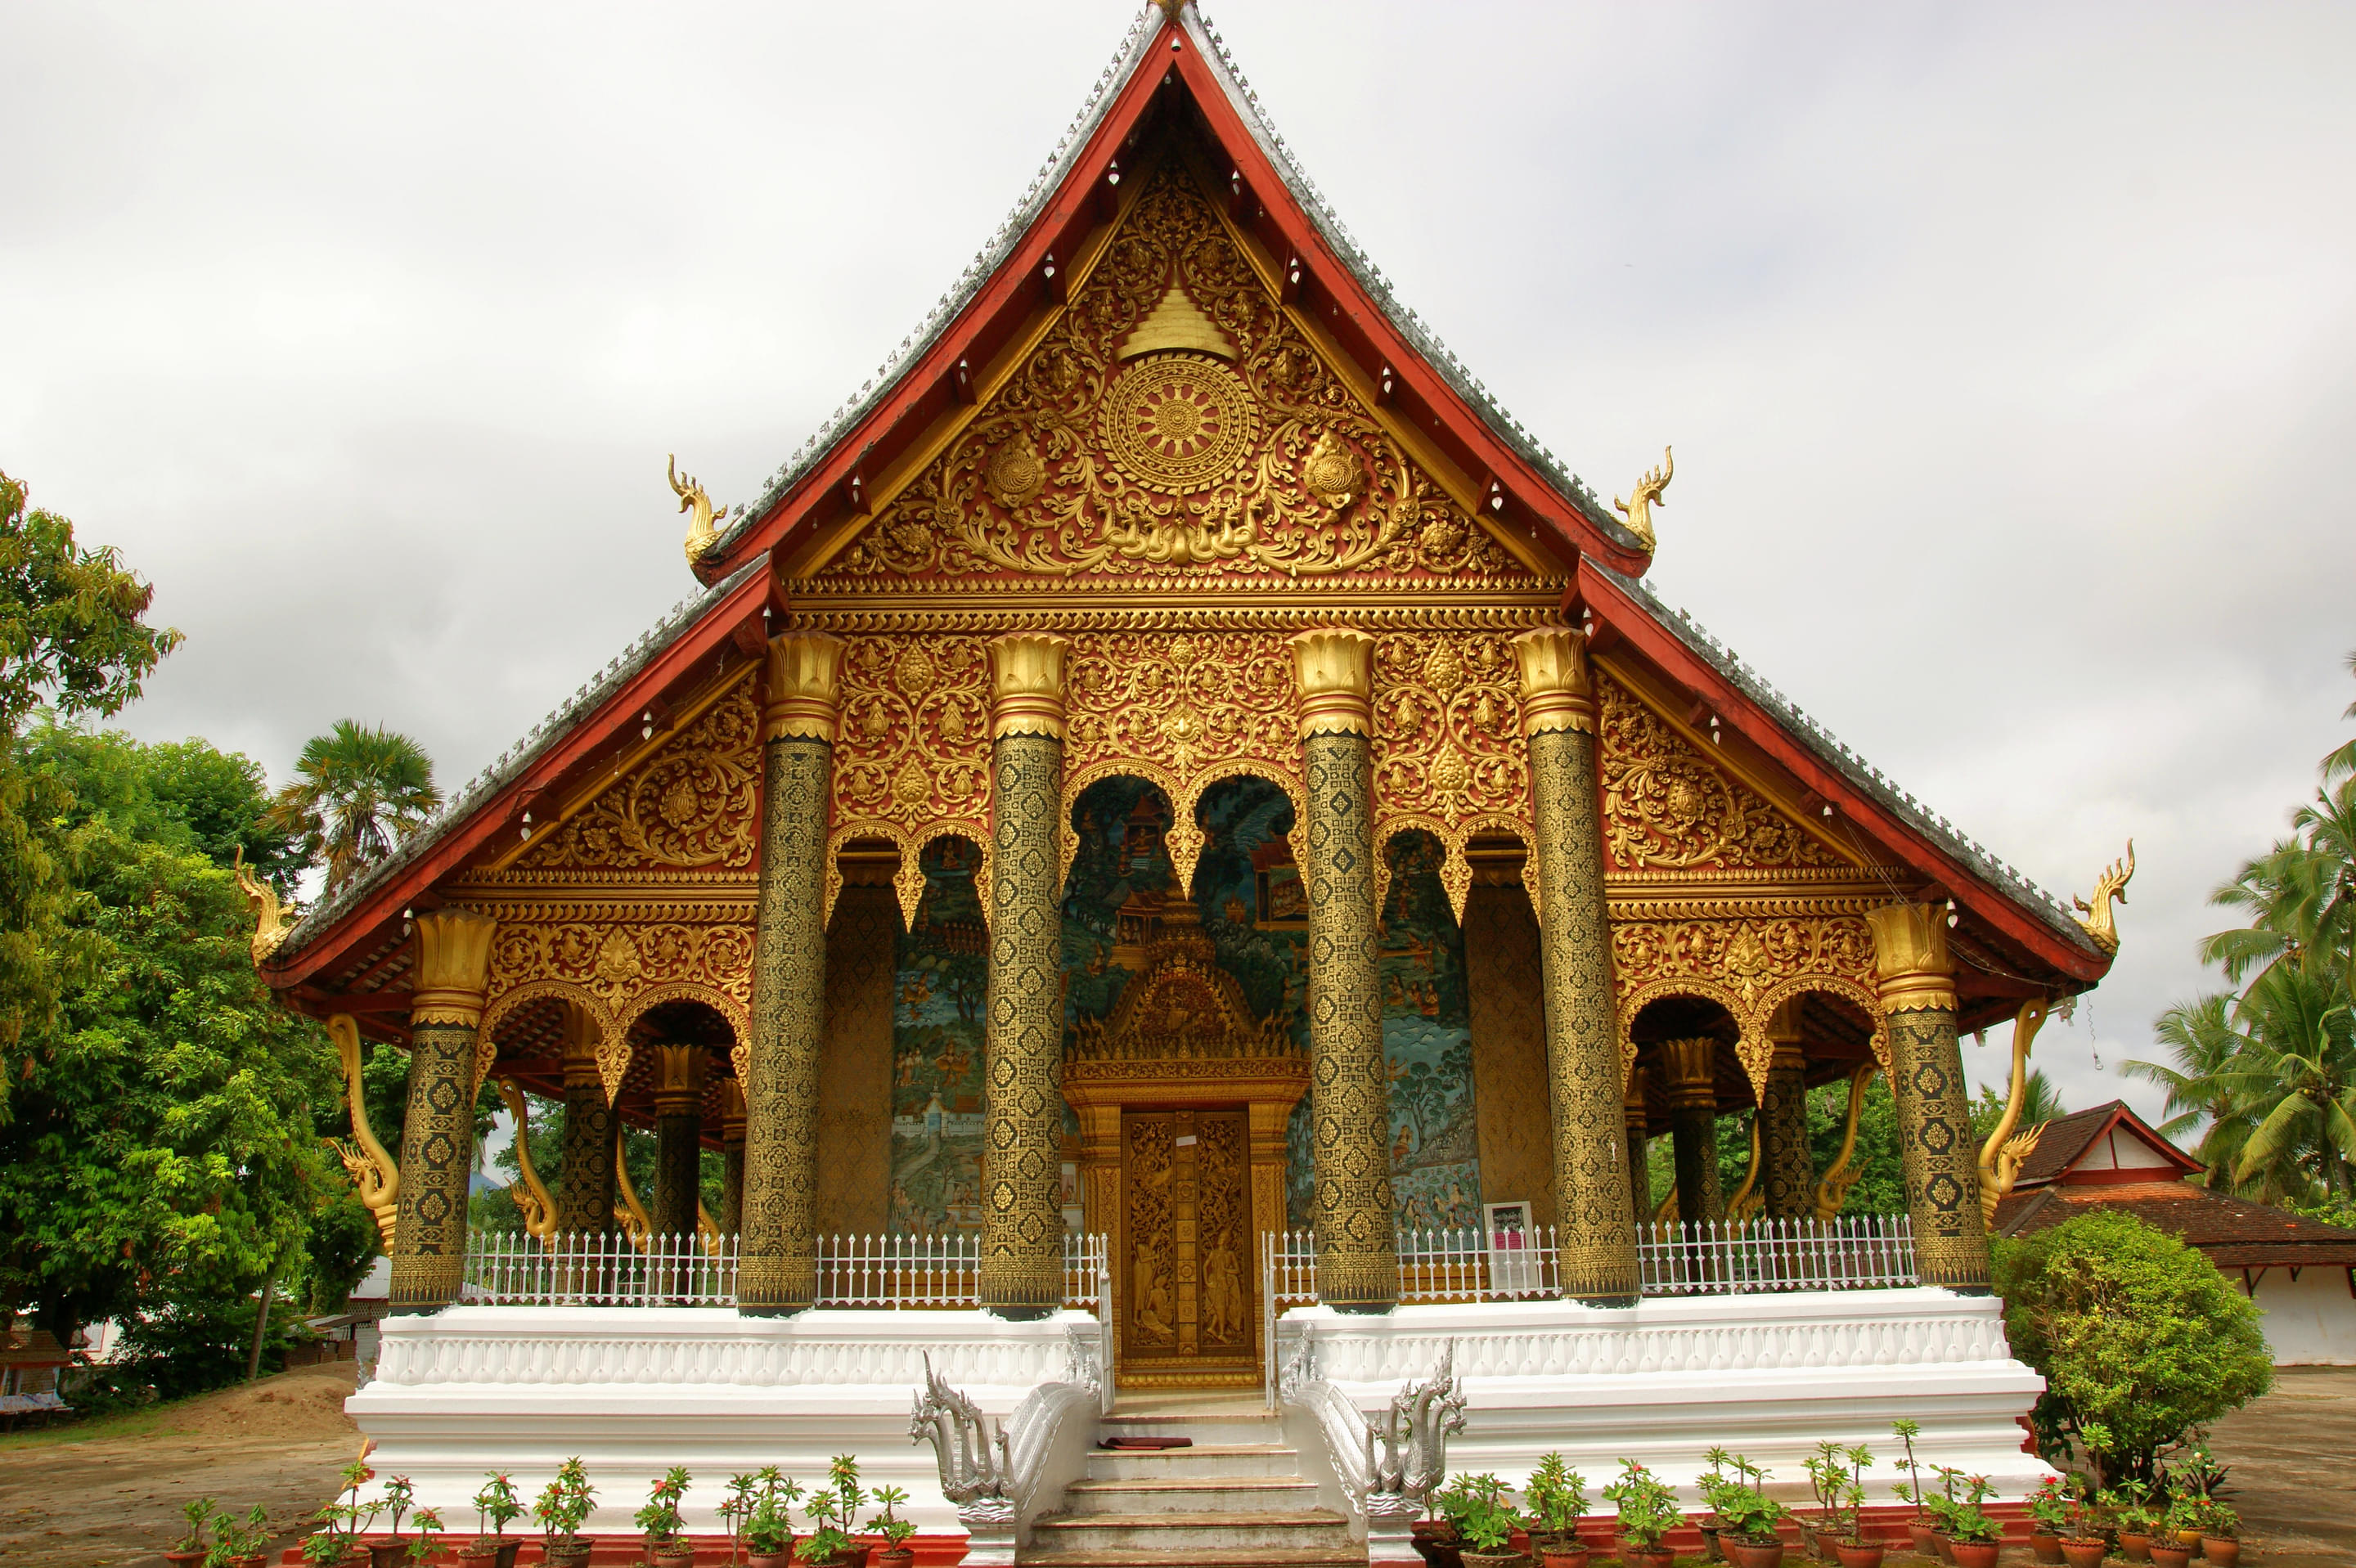 Wat Mahathat Overview